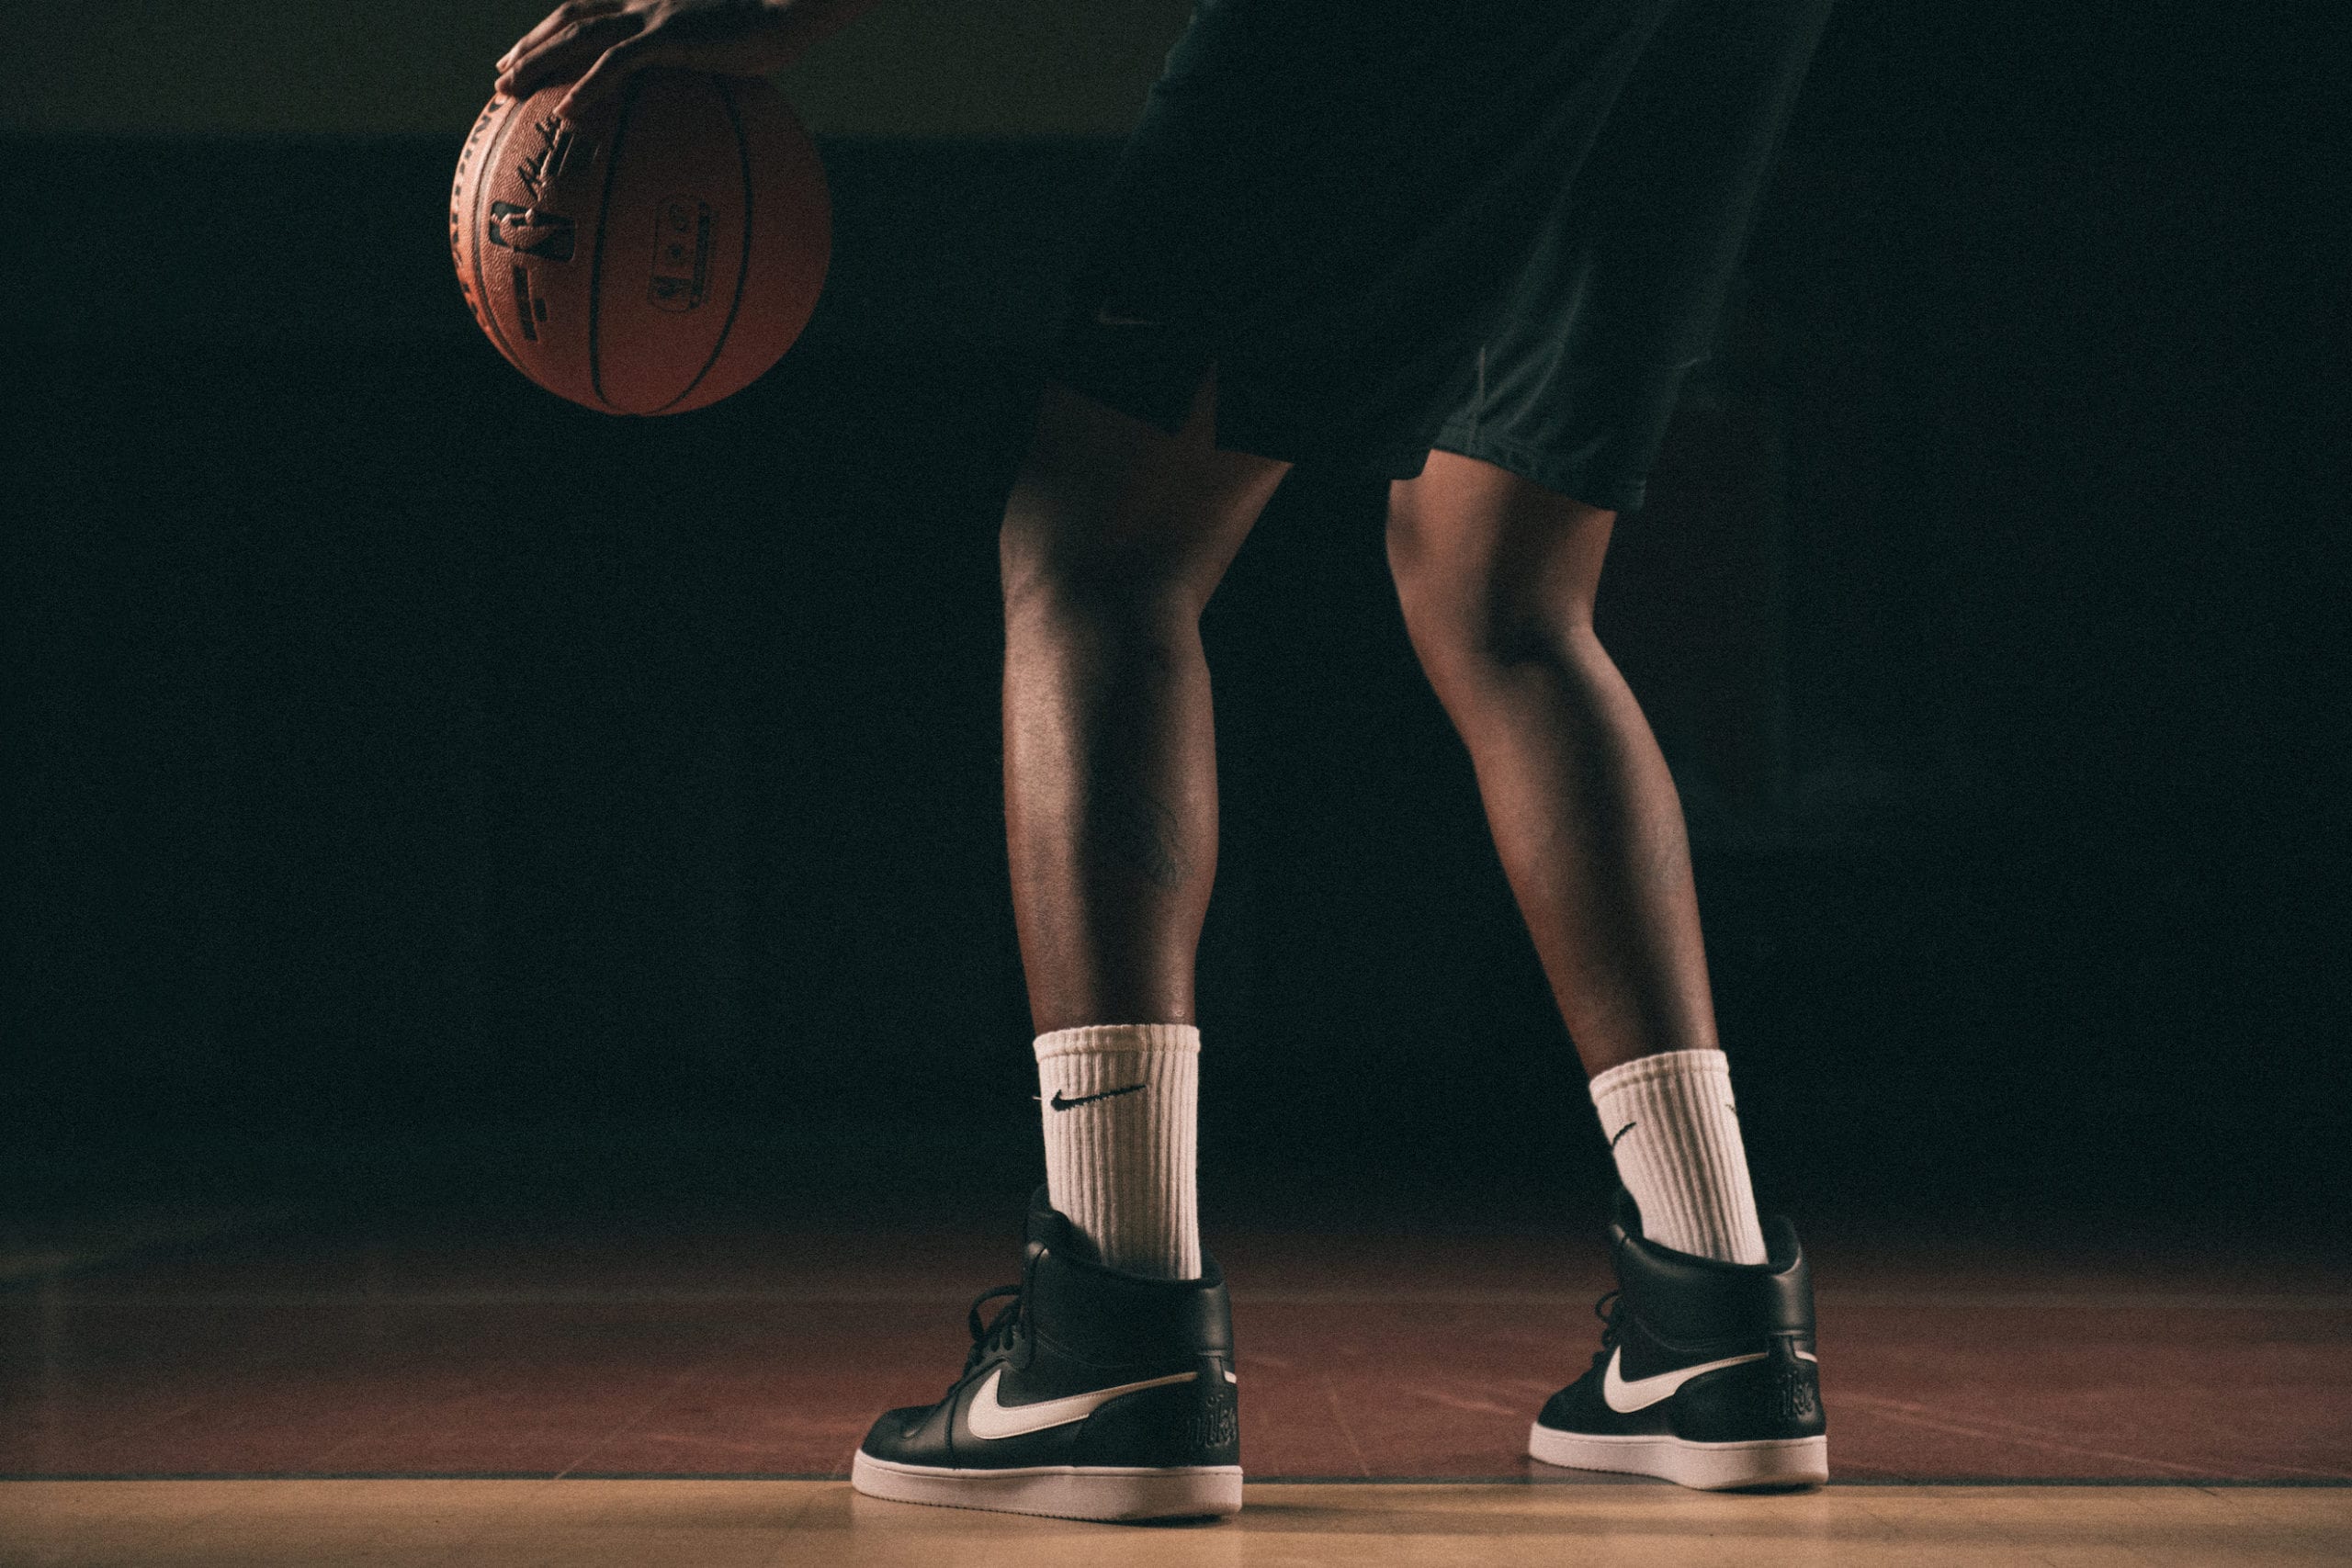 Nike Creative Marketing Concepts View from behind of the lower half of an African American man wearing black Nike shoes and white Nike socks poised holding a basketball on a basketball court with a light shining on him in semi darkness